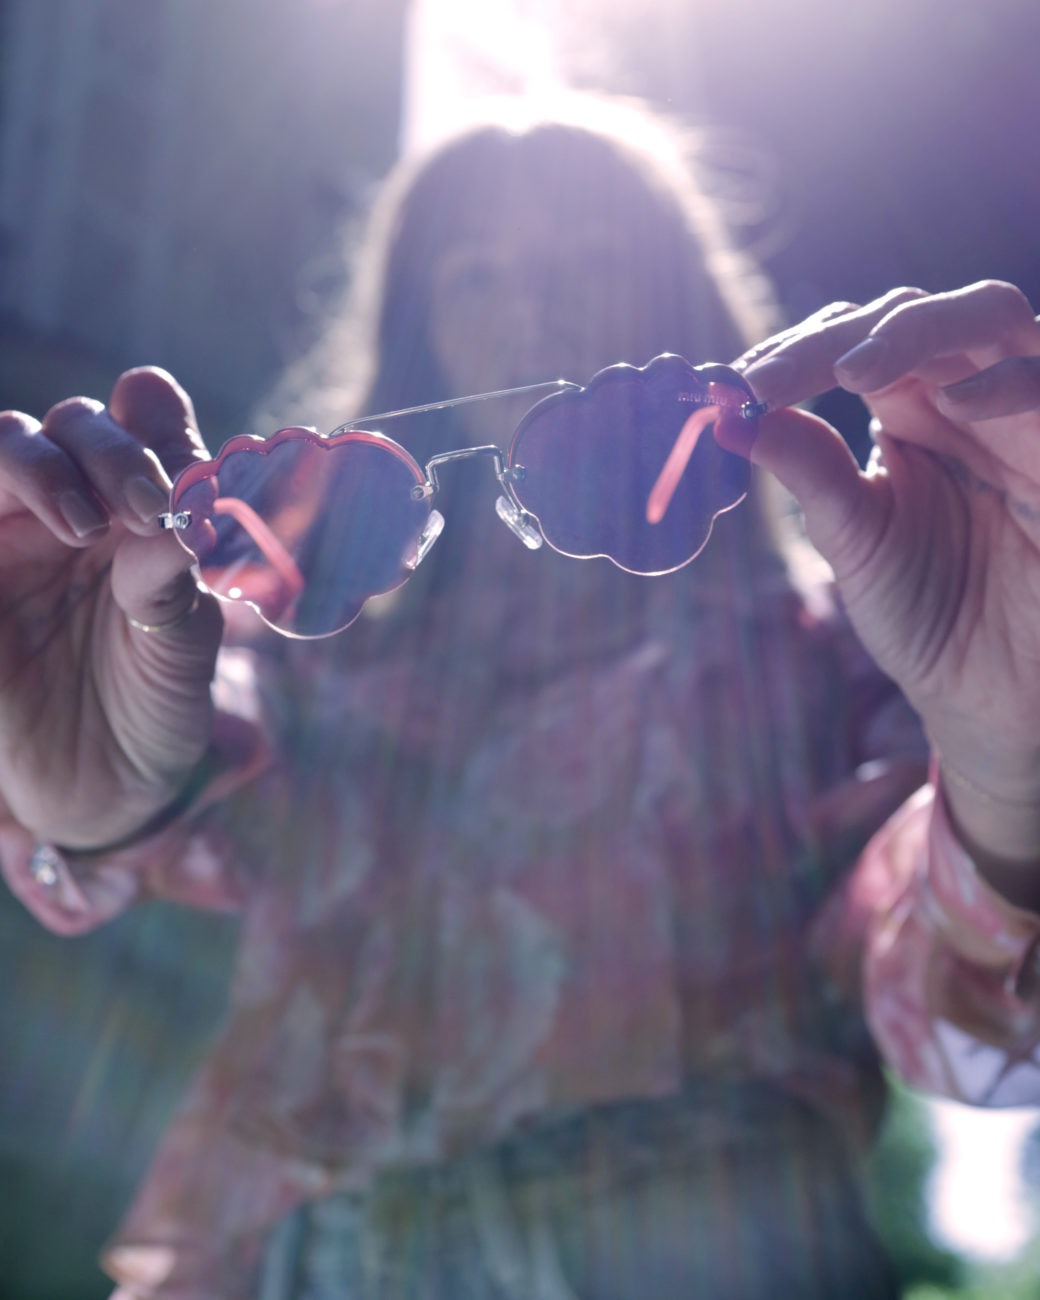 Miu Miu Eyewear Campaign, "Head in the Clouds" written and directed by Agostina Gálvez